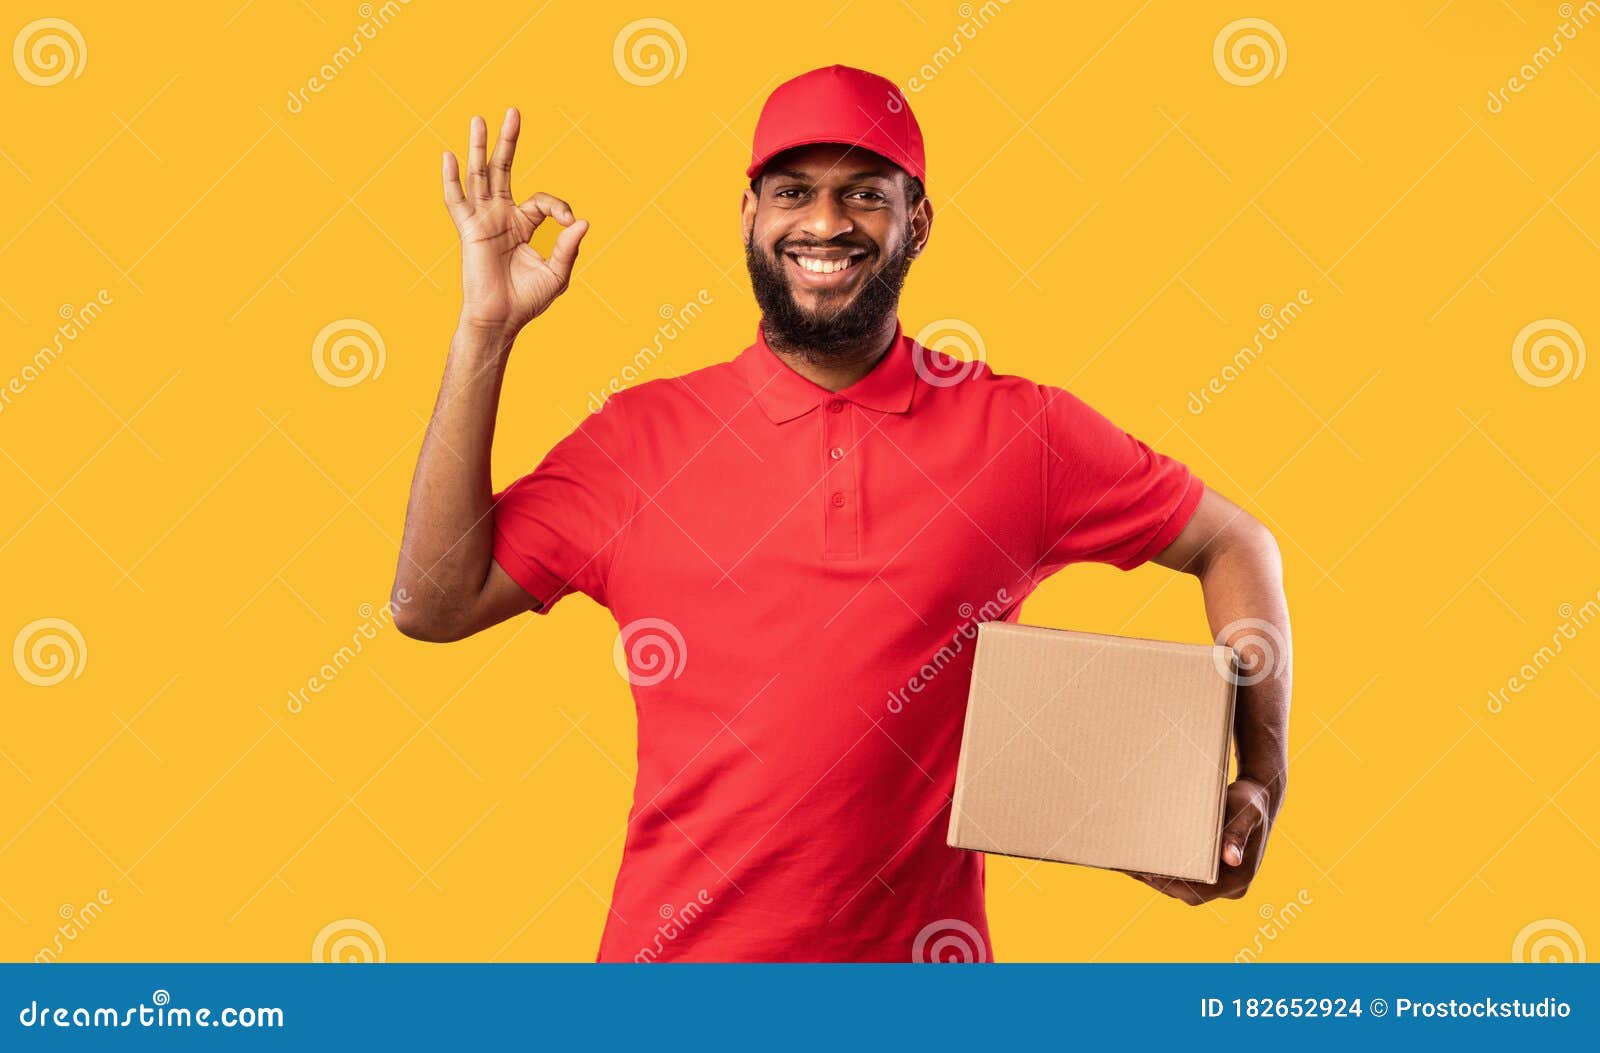 courier guy holding cardboard box gesturing okay on yellow background